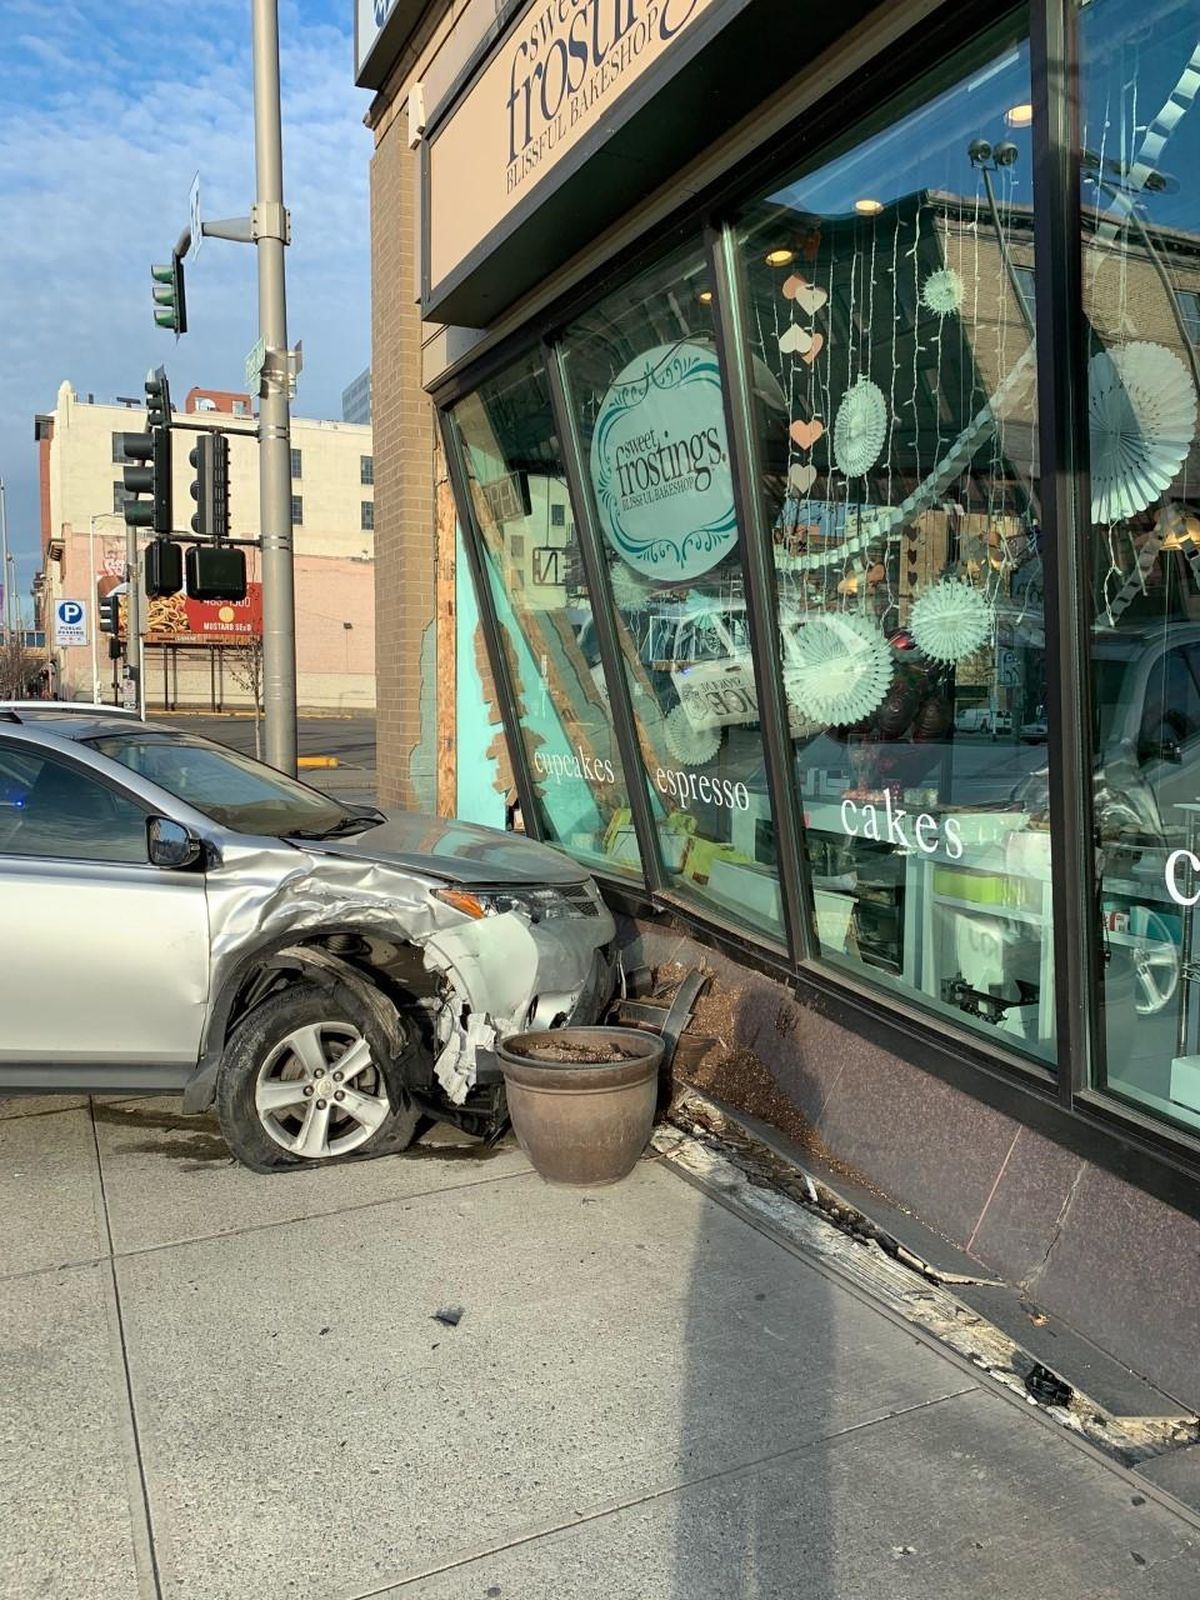 A car struck Sweet Frostings Blissful Bakeshop in downtown Spokane on Saturday, Feb. 22, 2020. No serious injuries were reported. (Courtesy photo / Jessica Winfrey)